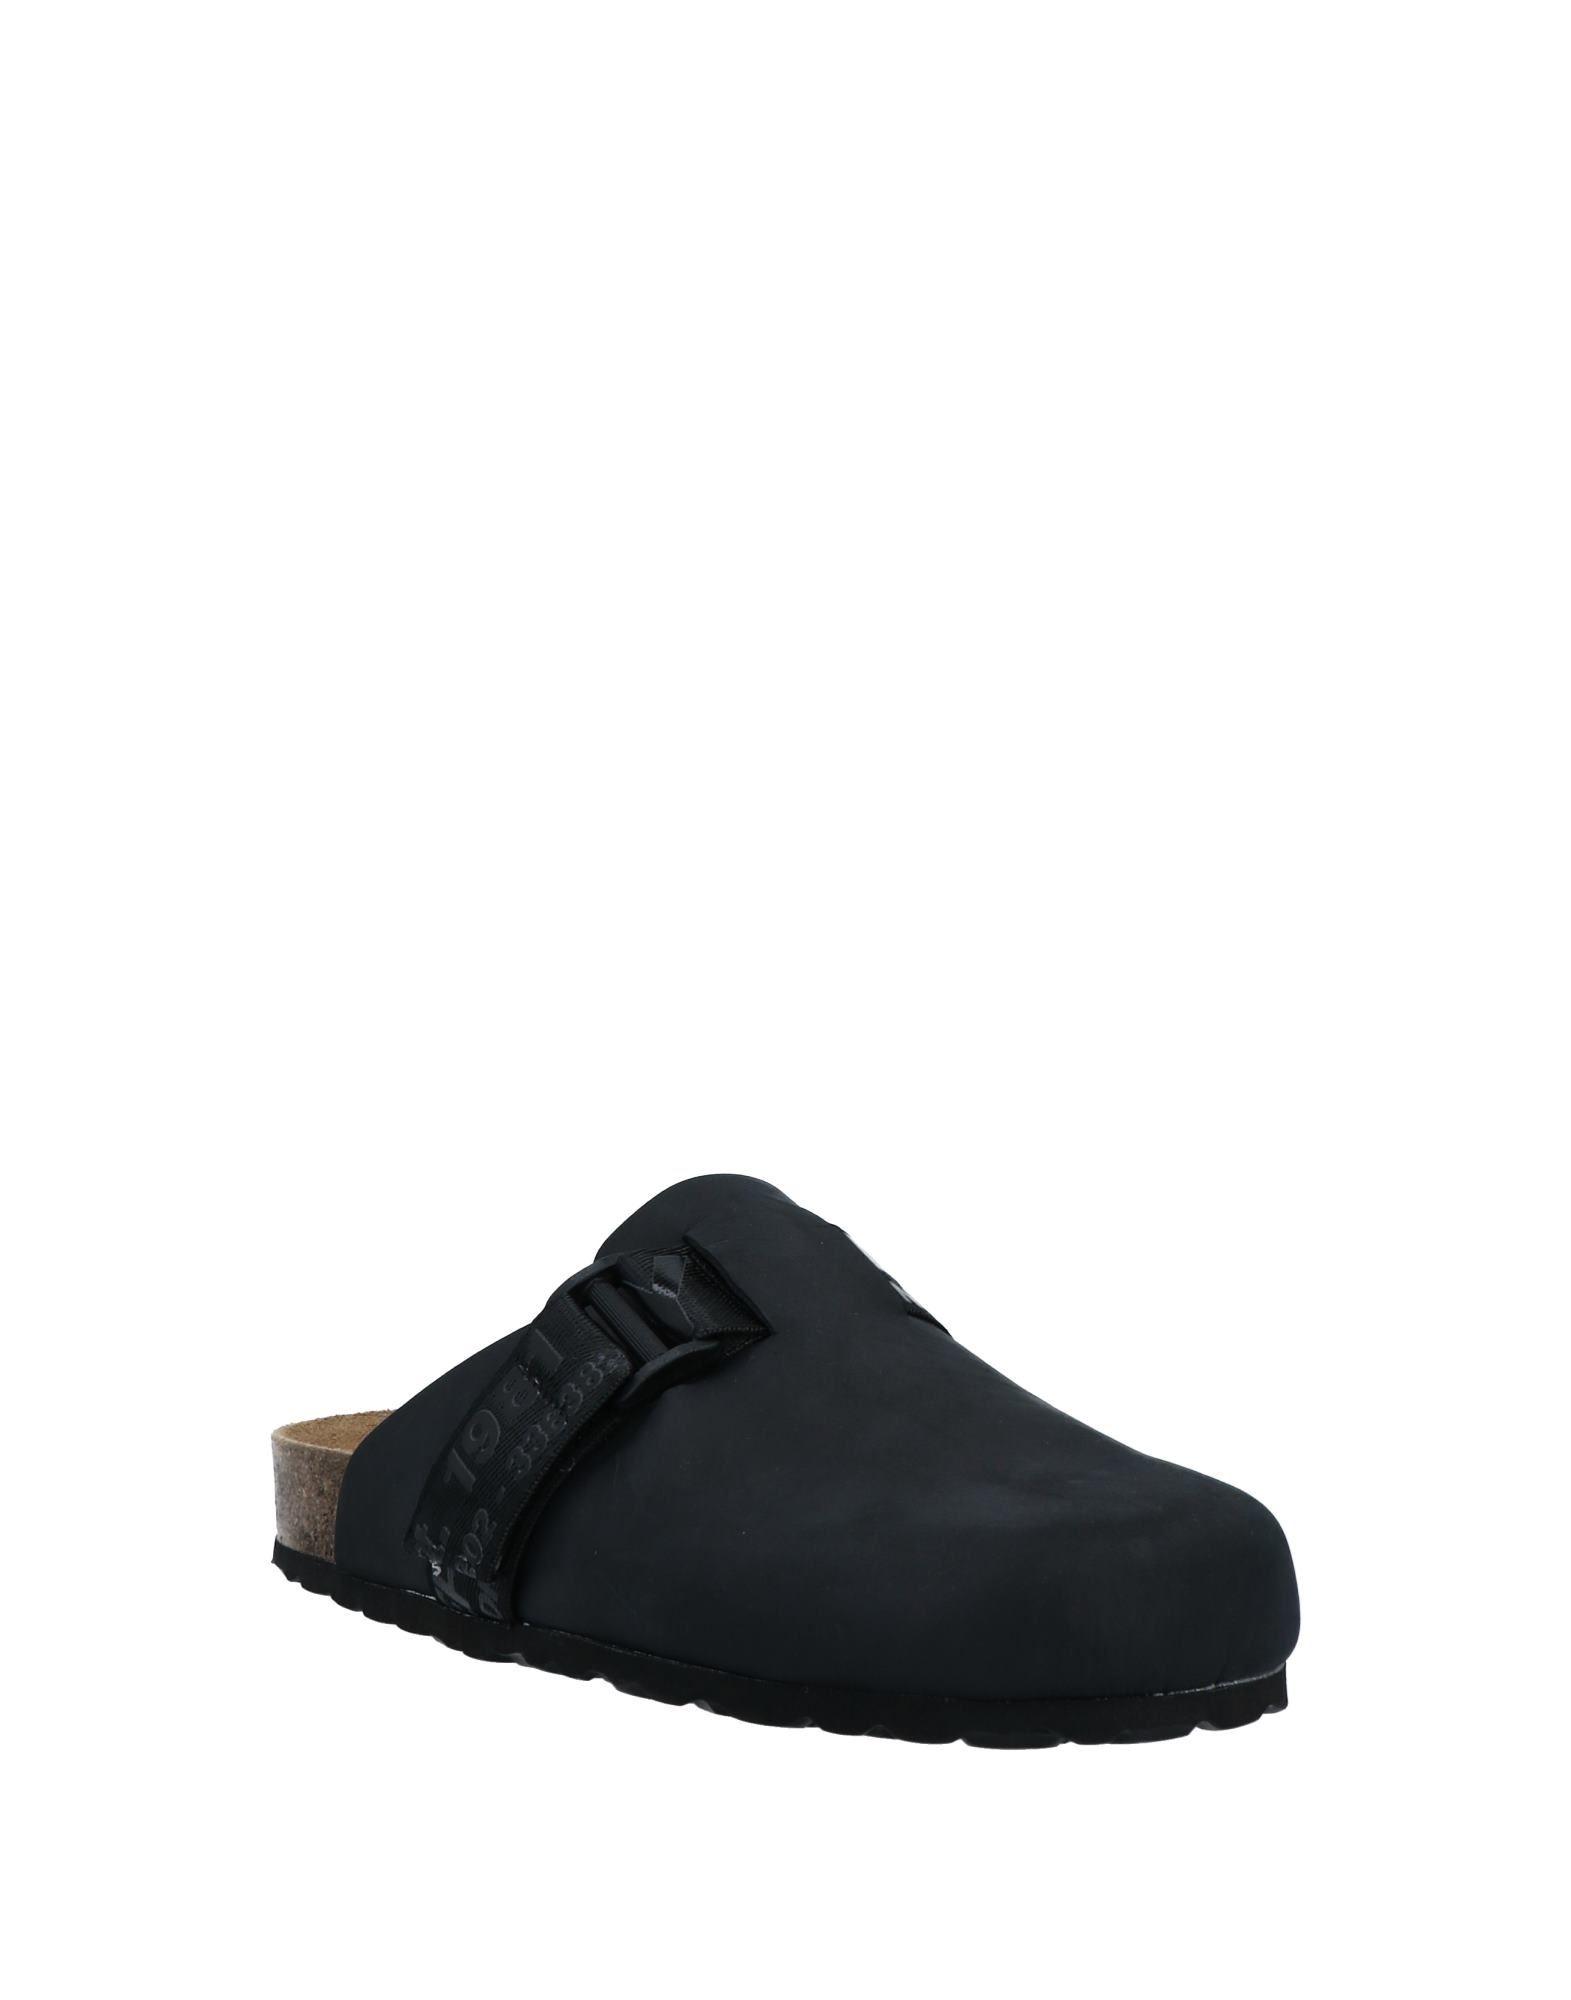 Replay Rubber Mules & Clogs in Black for Men - Lyst